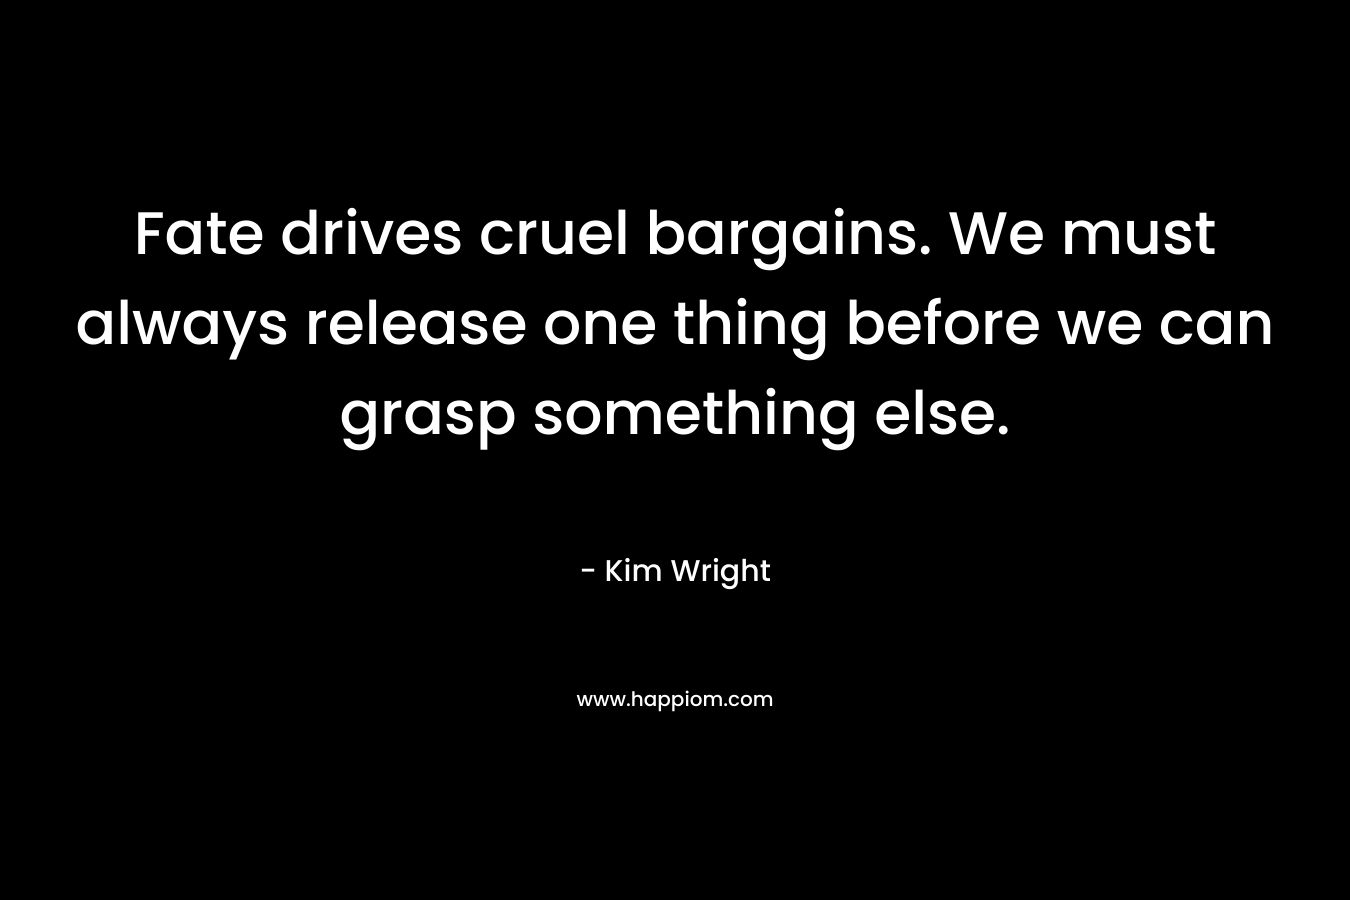 Fate drives cruel bargains. We must always release one thing before we can grasp something else.